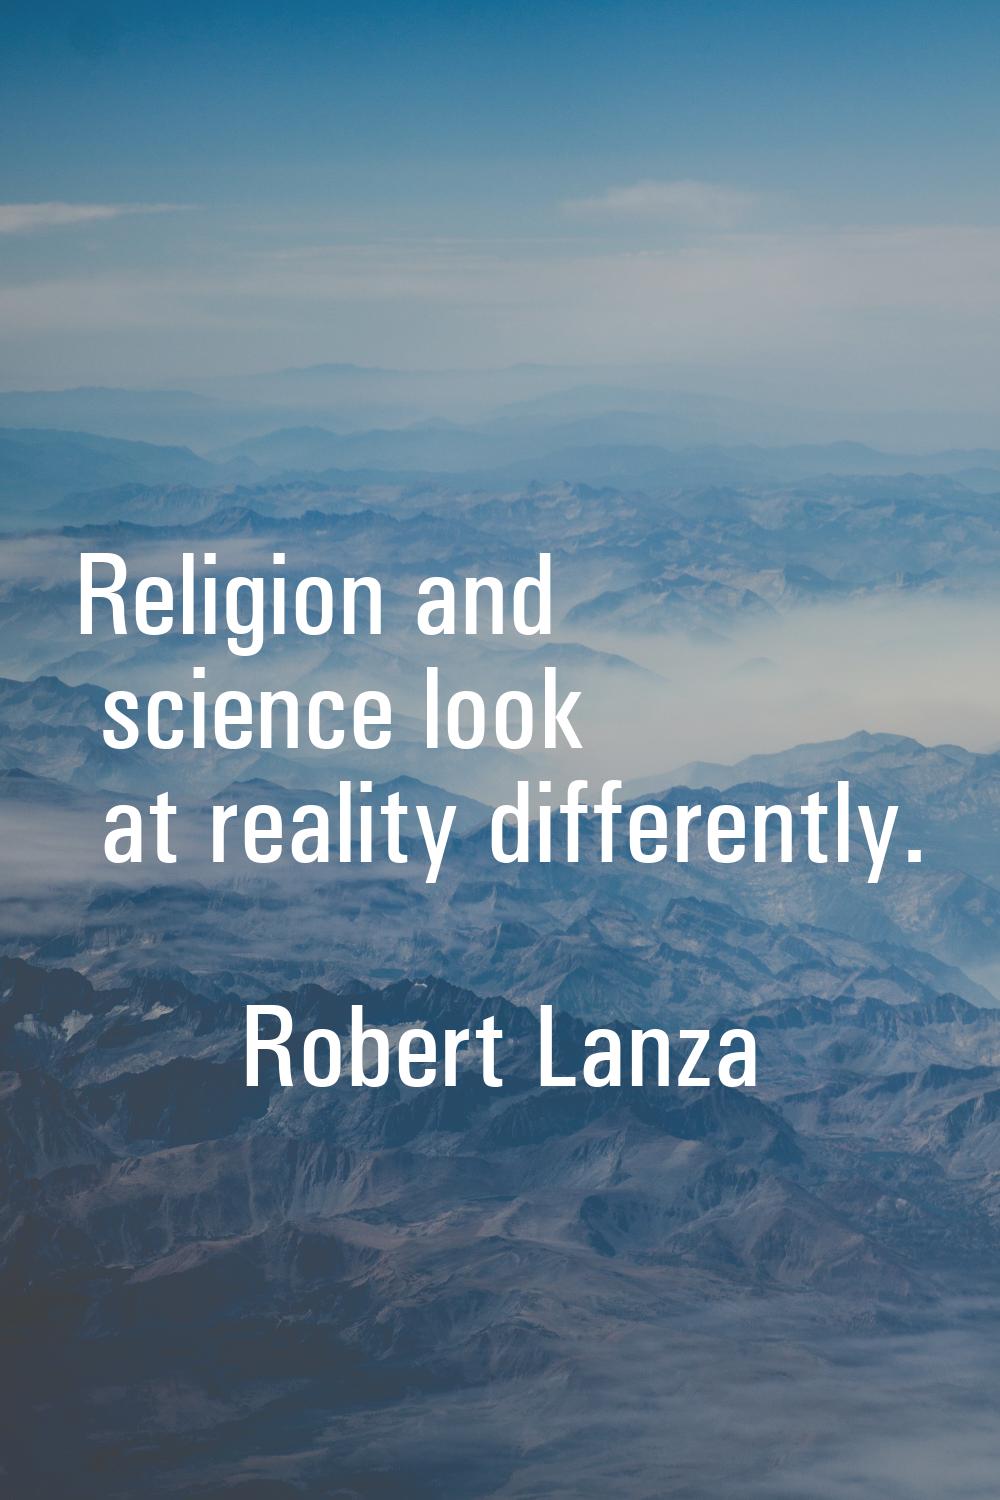 Religion and science look at reality differently.